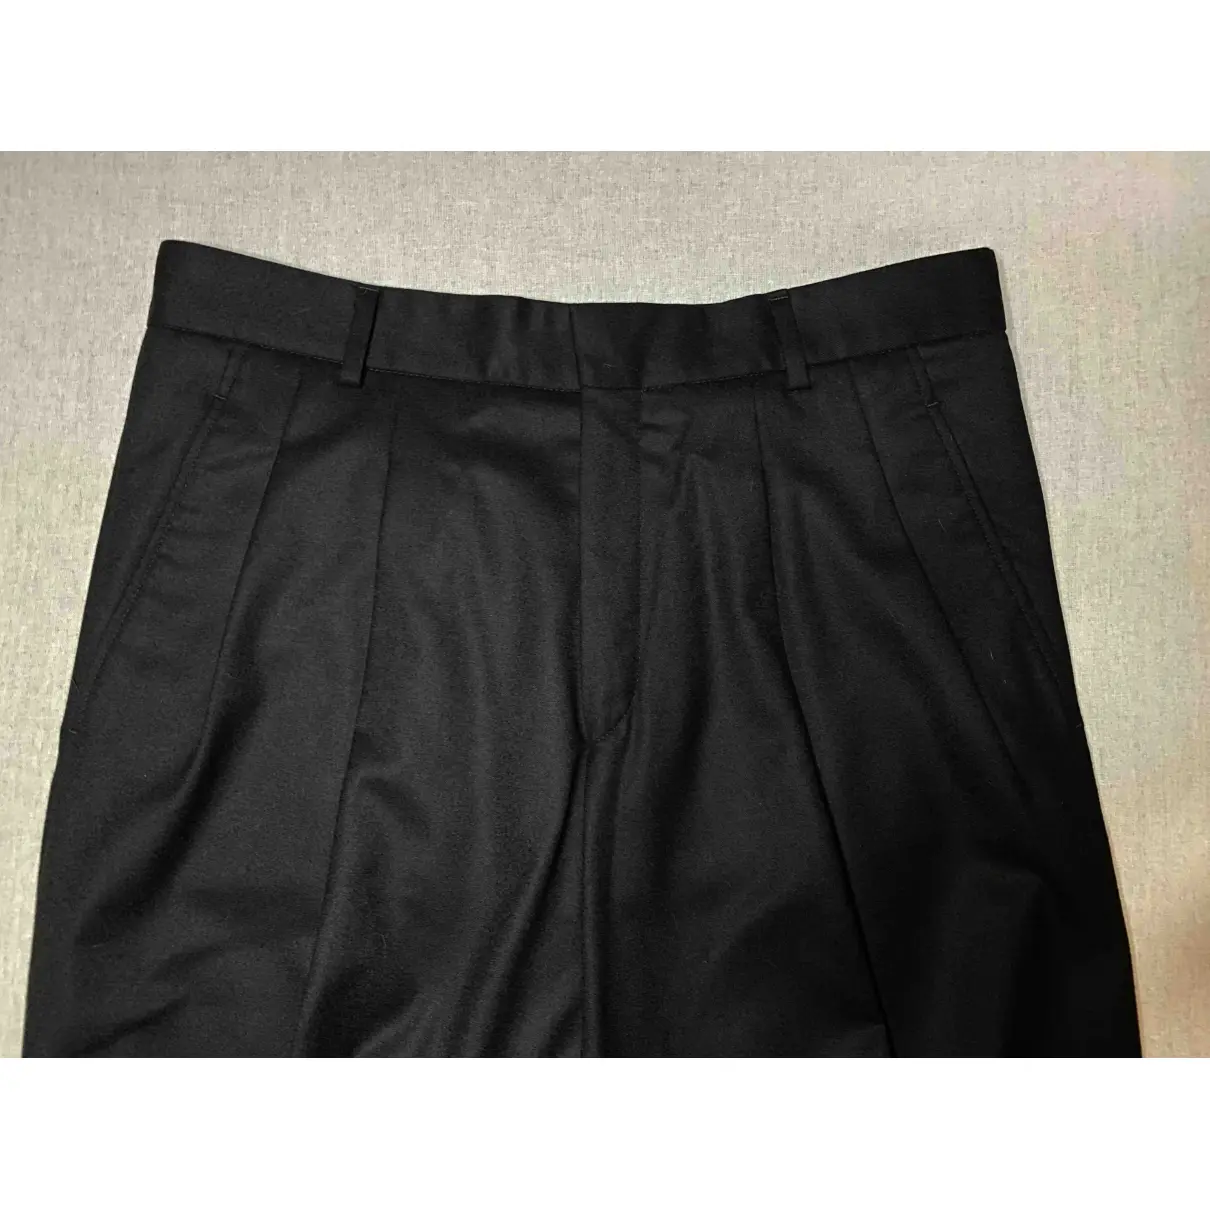 Luxury Givenchy Trousers Men